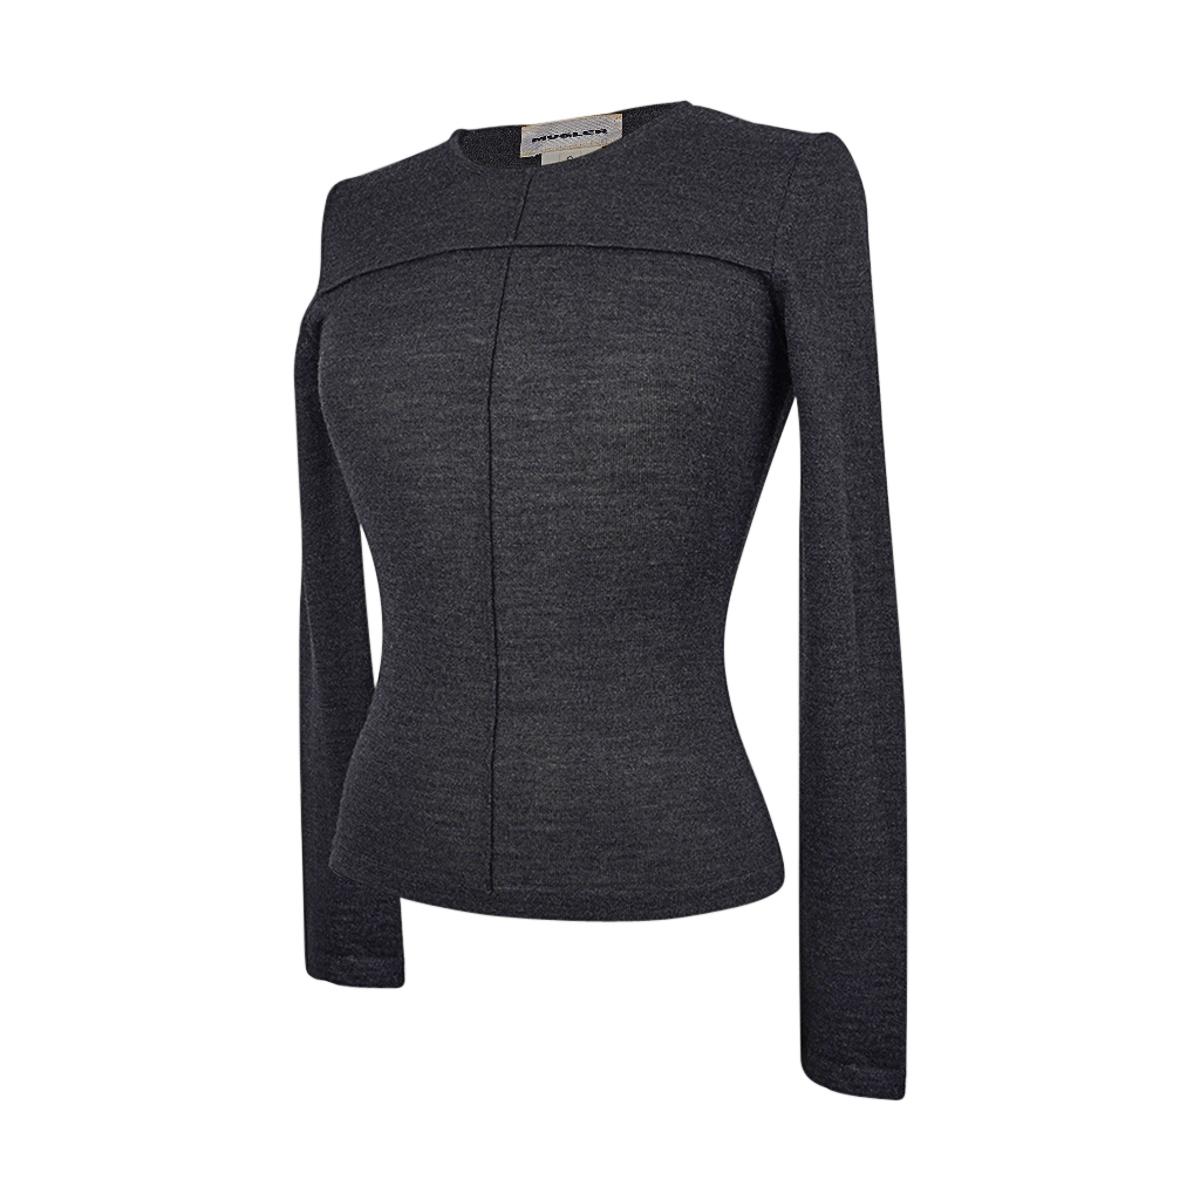 Mugler Vintage Charcoal Gray Knit Top Classic S In Excellent Condition For Sale In Miami, FL